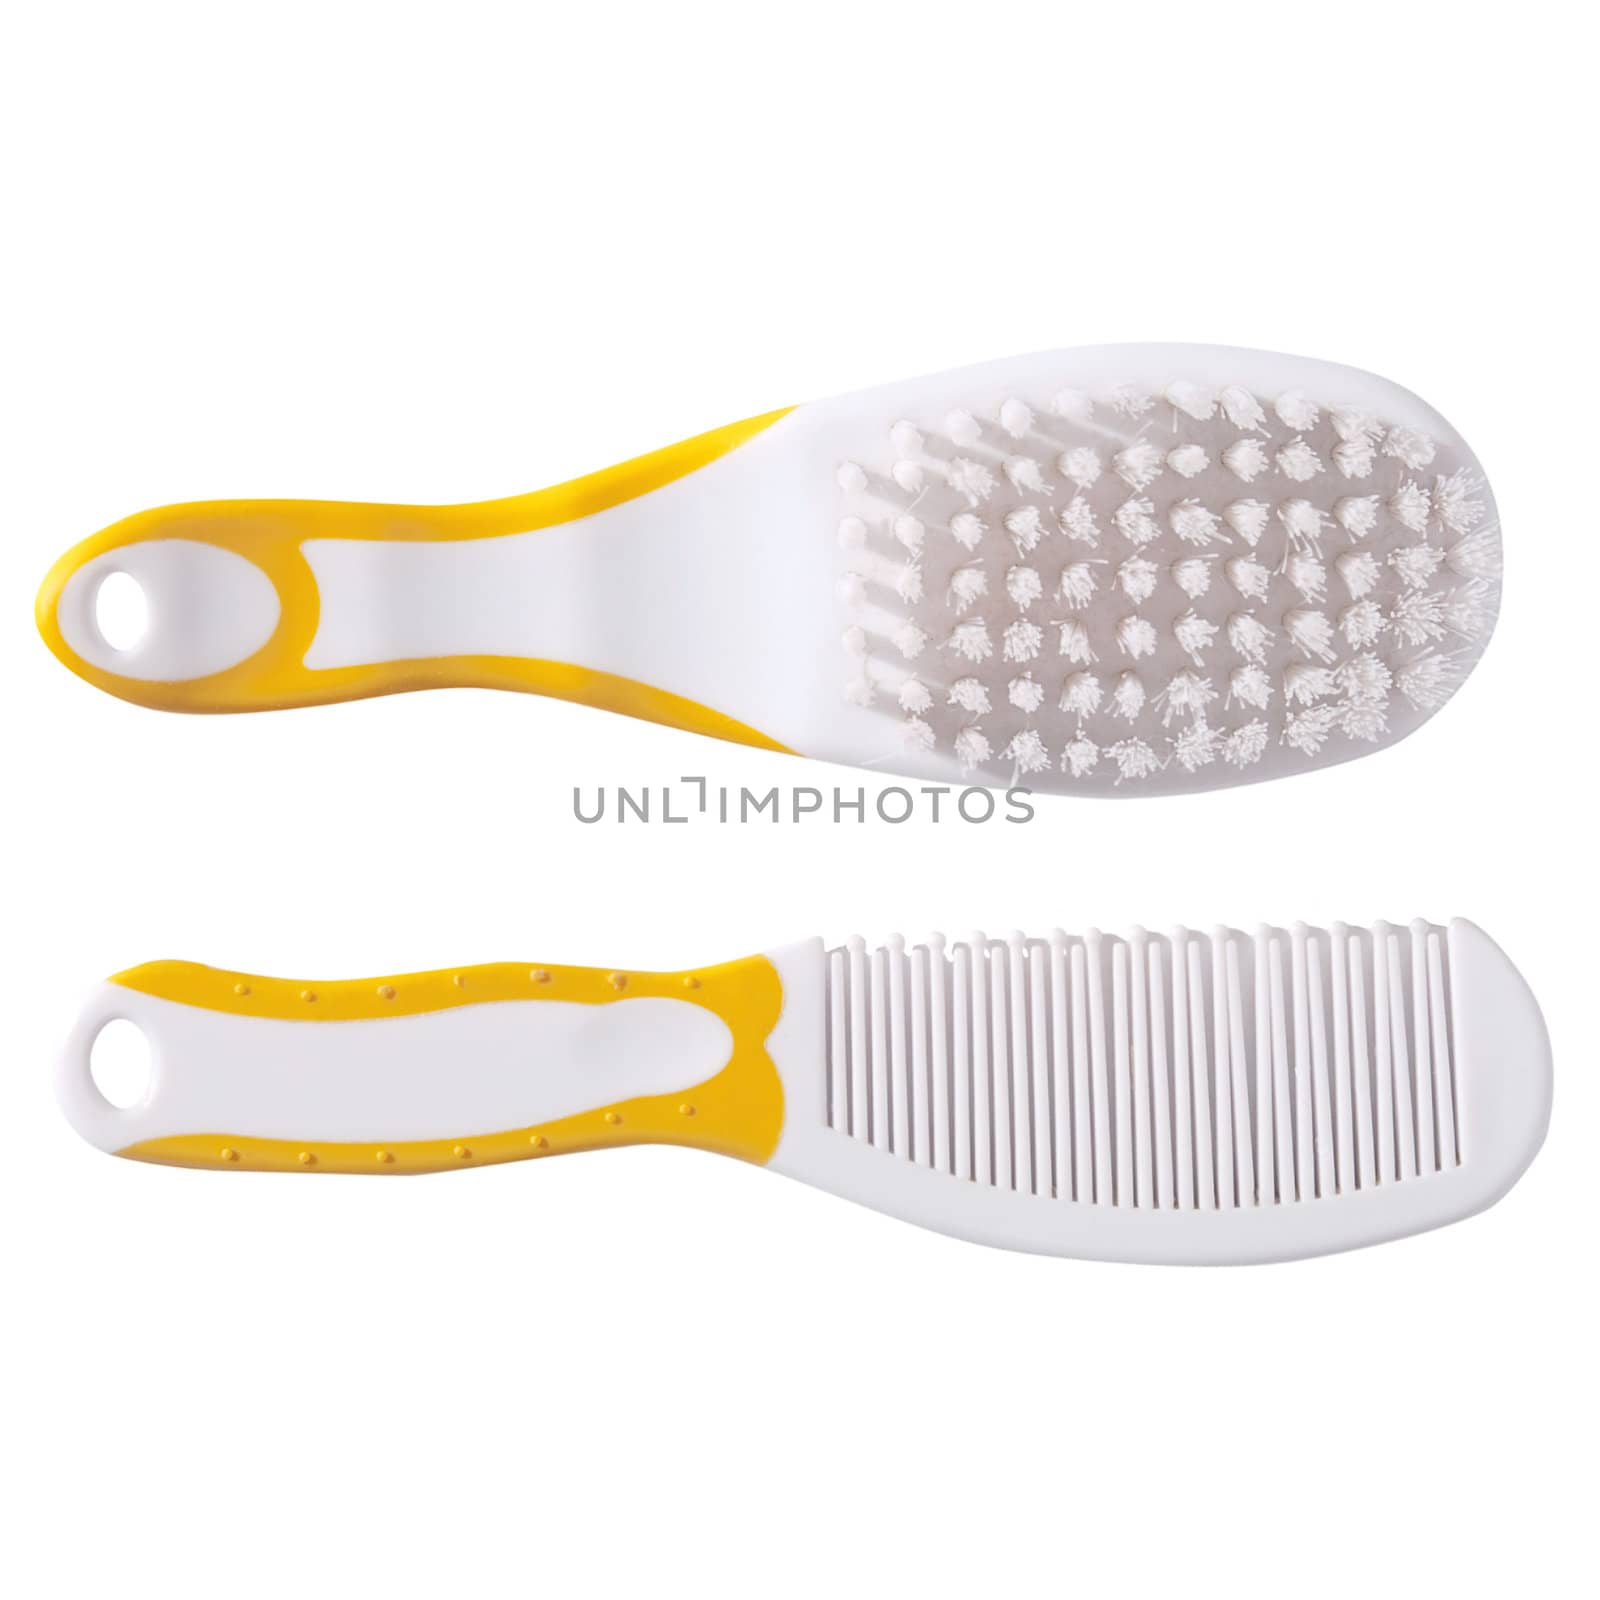 Hairbrush for baby isolated on the white background.